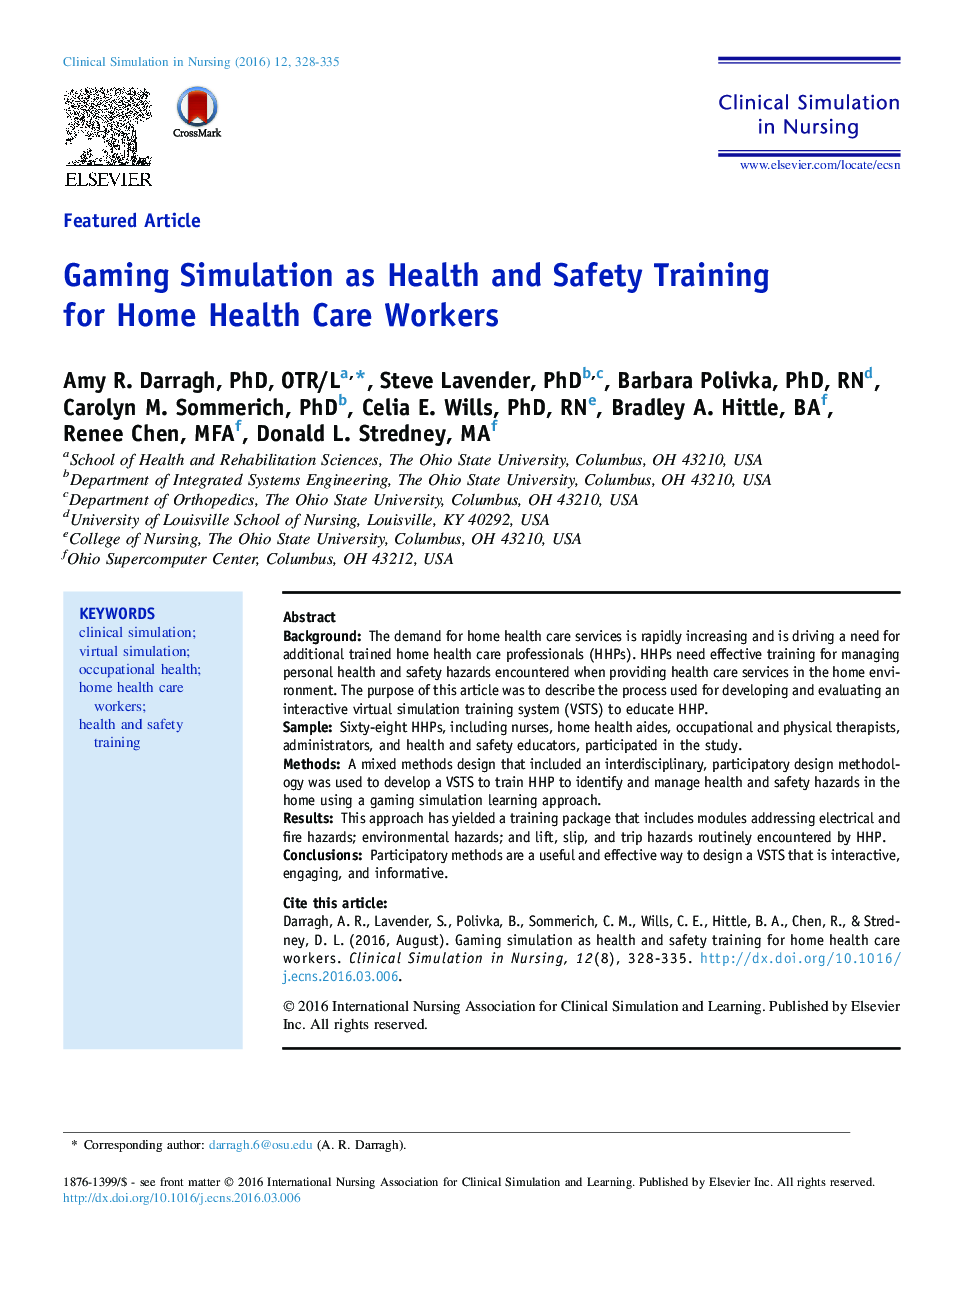 Gaming Simulation as Health and Safety Training for Home Health Care Workers